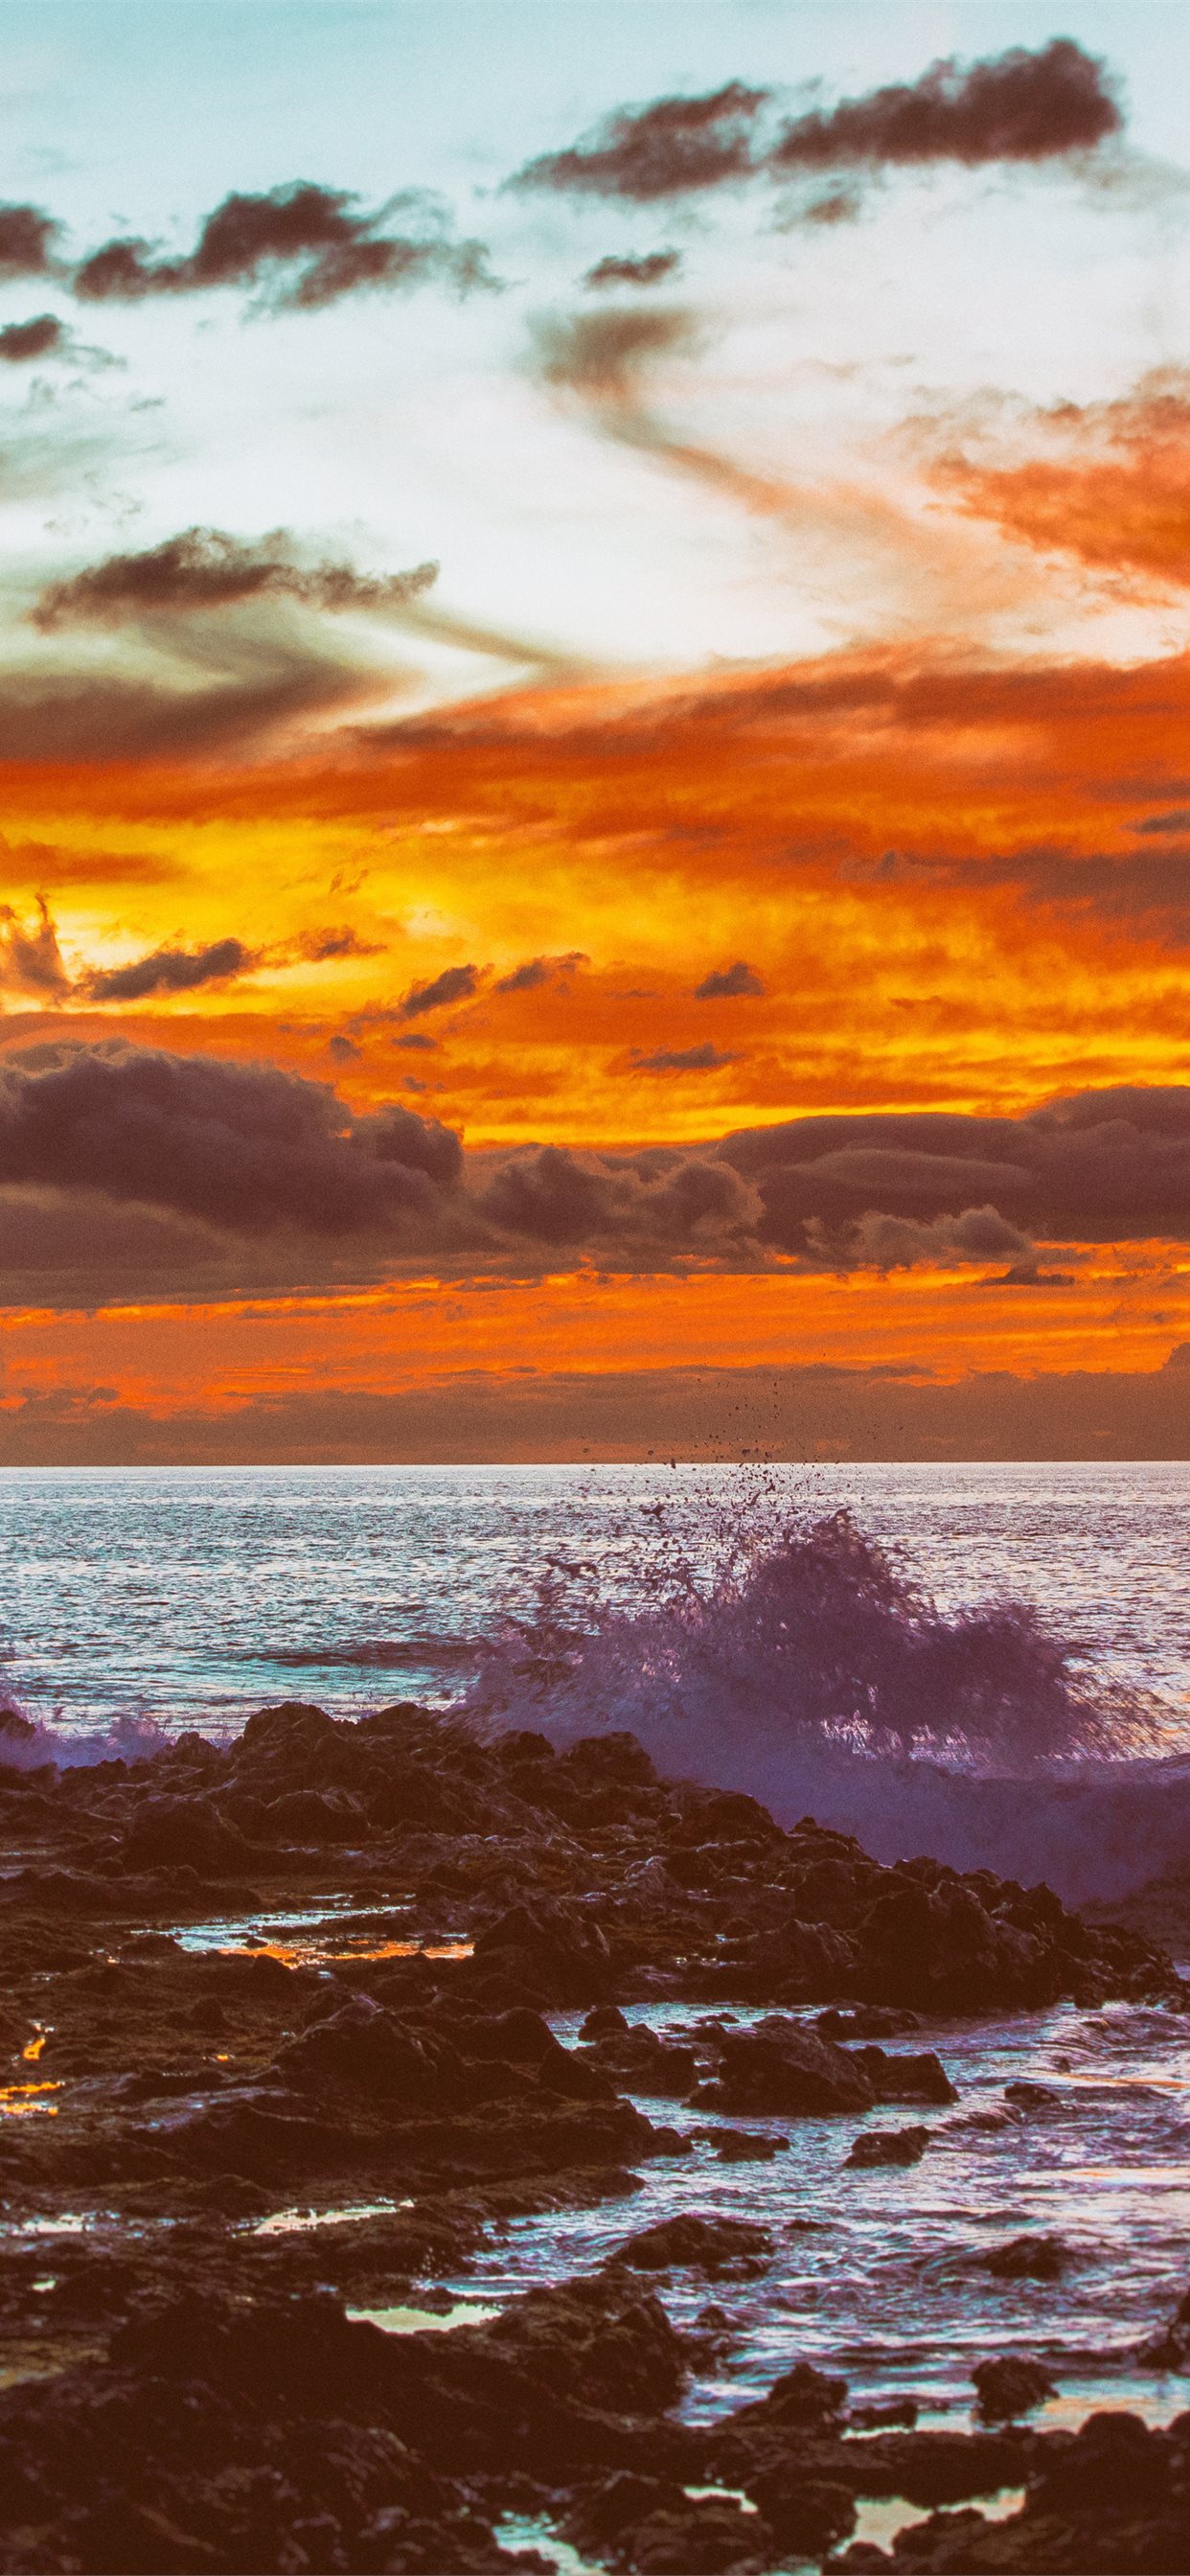 Hawaii Sunset 5k Iphone X Wallpapers Free Download